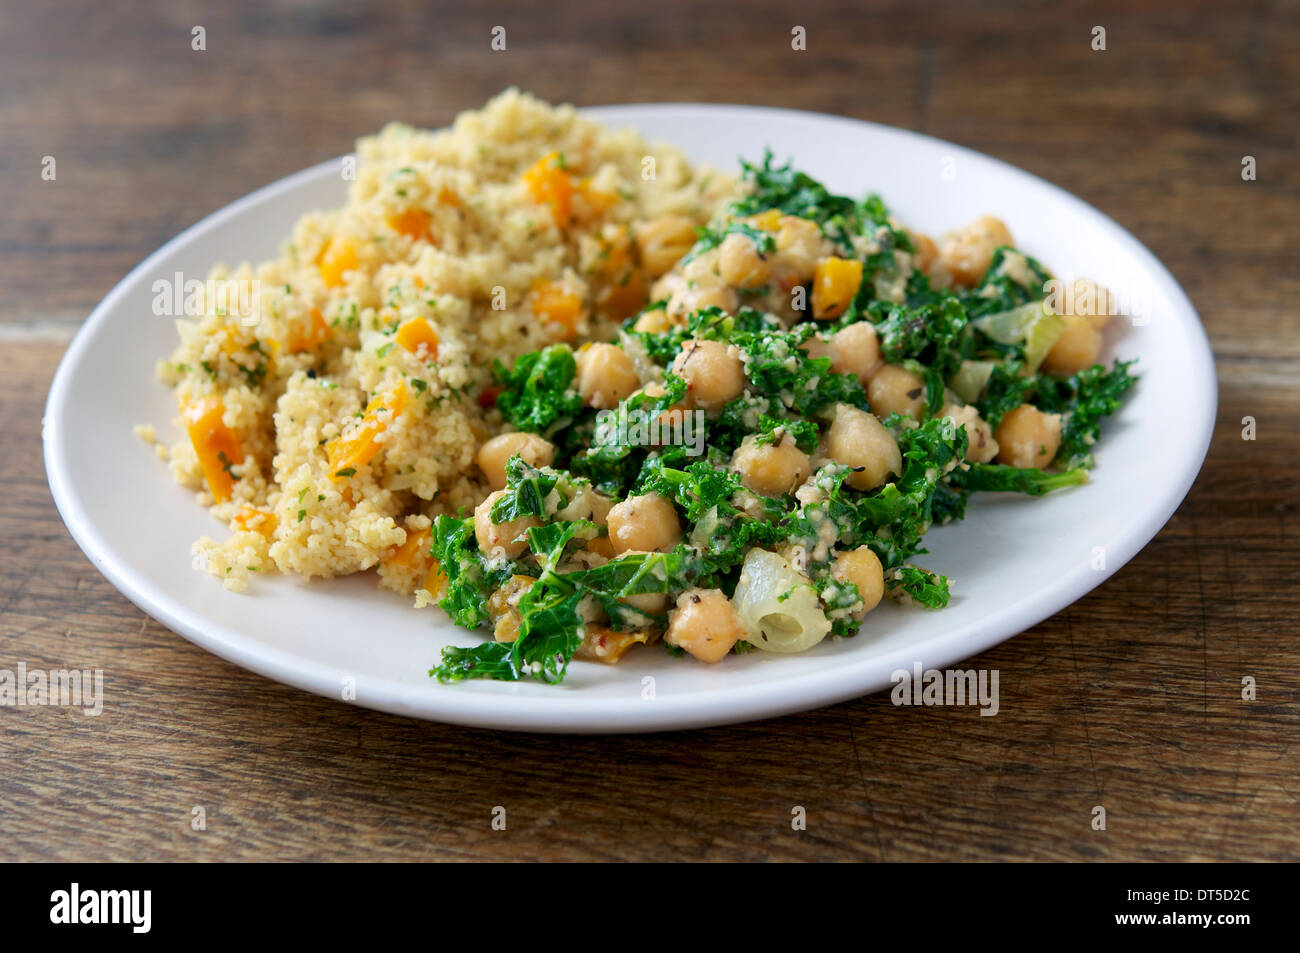 A hearty and filling meal with kale, cashew and chickpeas, served with confetti couscous. Stock Photo